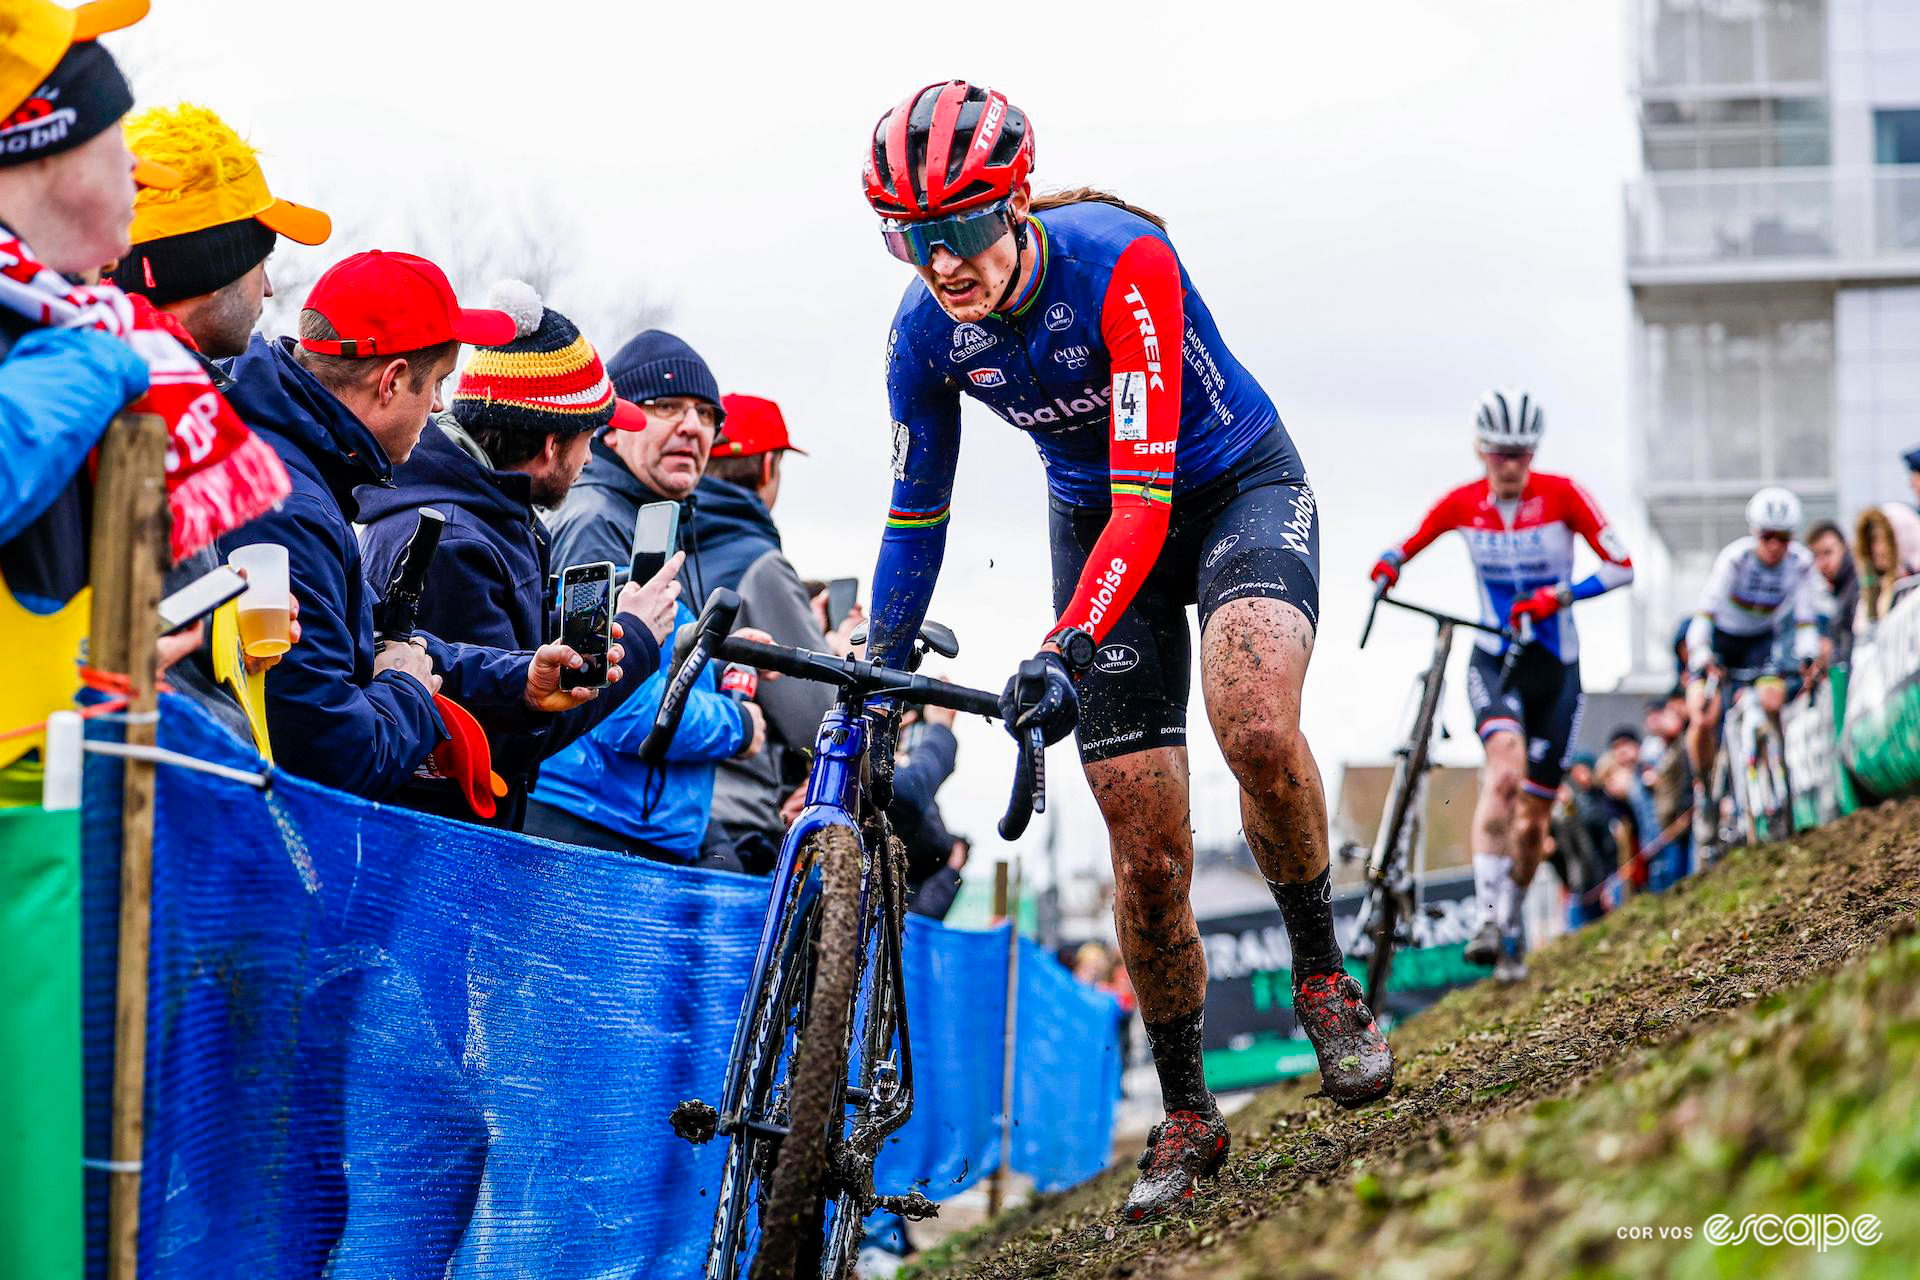 Mud covering her legs, Lucinda Brand grimaces as she pushes her bike through the off-camber section during X20 Trofee Kortrijk, watched by fans wrapped up agianst the cold.